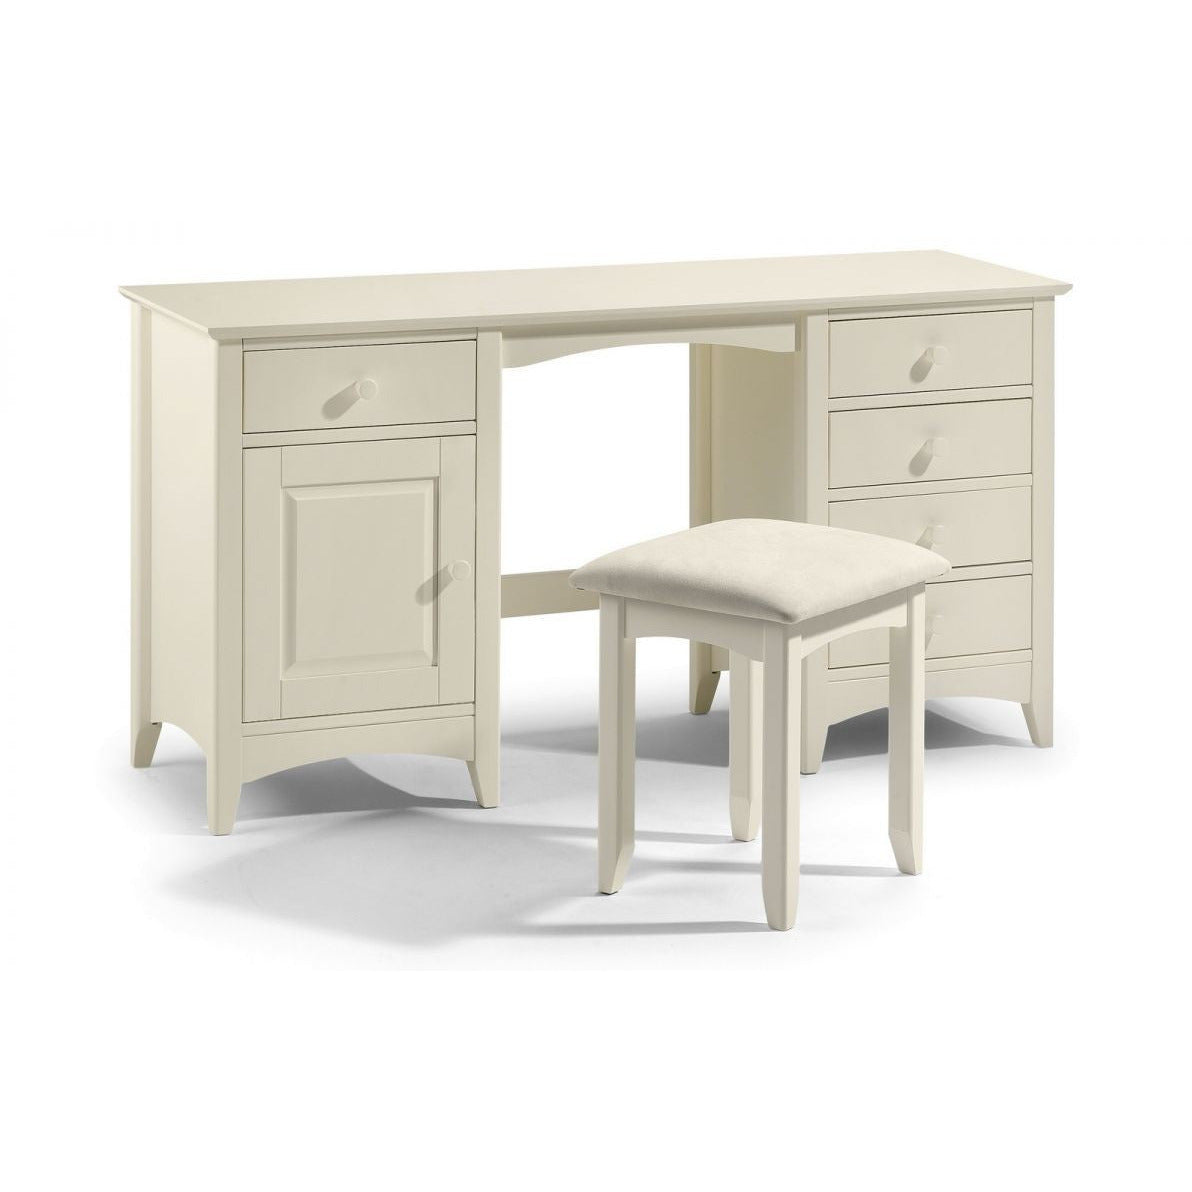 CAMEO TWIN PEDESTAL DRESSING TABLE